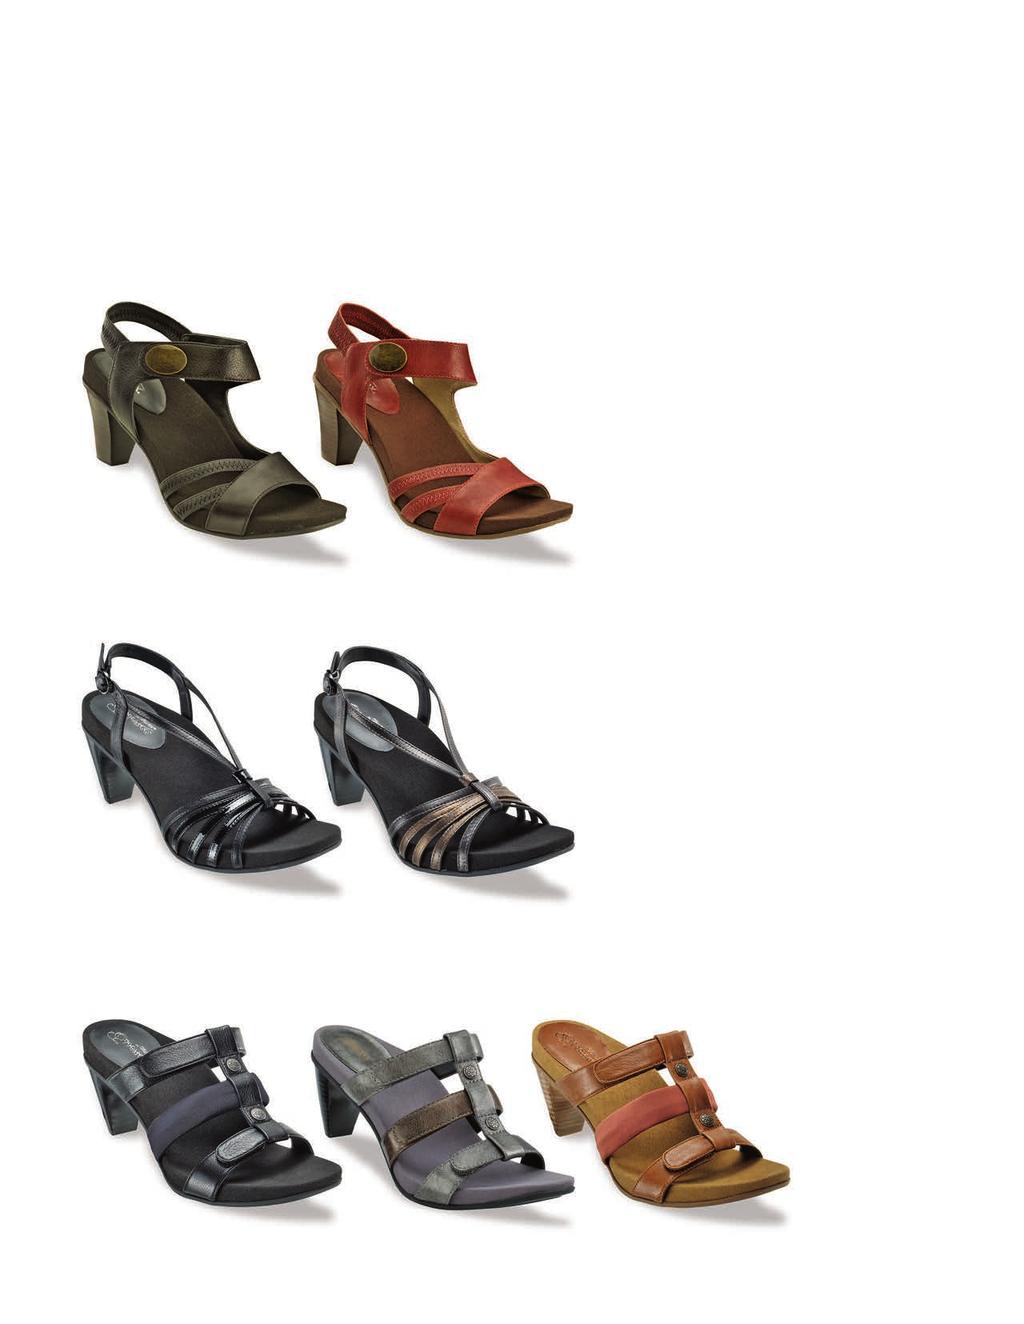 HEELED SANDALS n Lynco orthotic footbeds for support, balance & alignment n Memory foam cushioned heel seat n Aegis anti-microbial technology to help protect against fungi, bacteria & odor n Leather